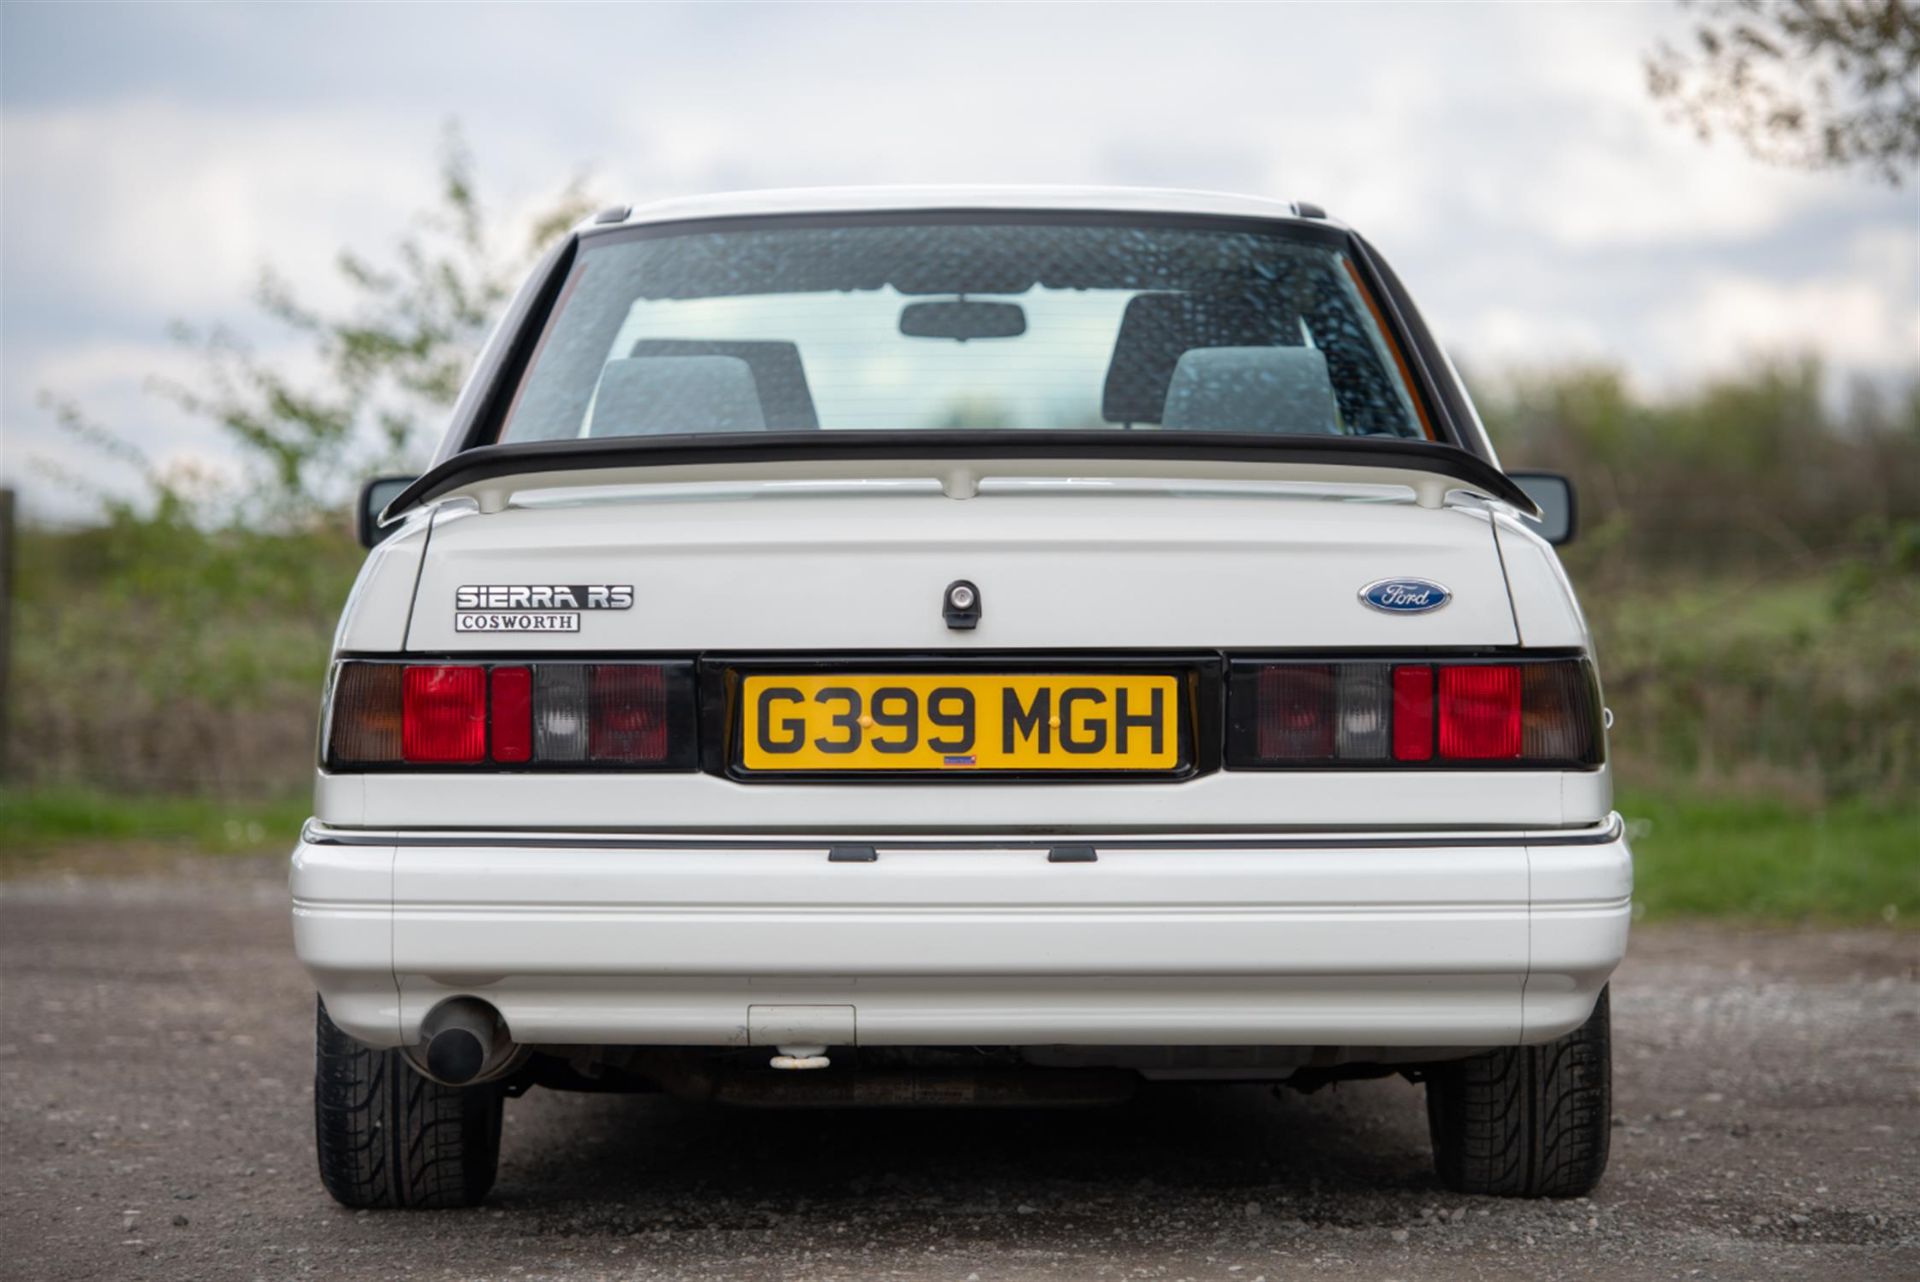 1989 Ford Sierra Sapphire RS Cosworth (2WD) - Image 7 of 10